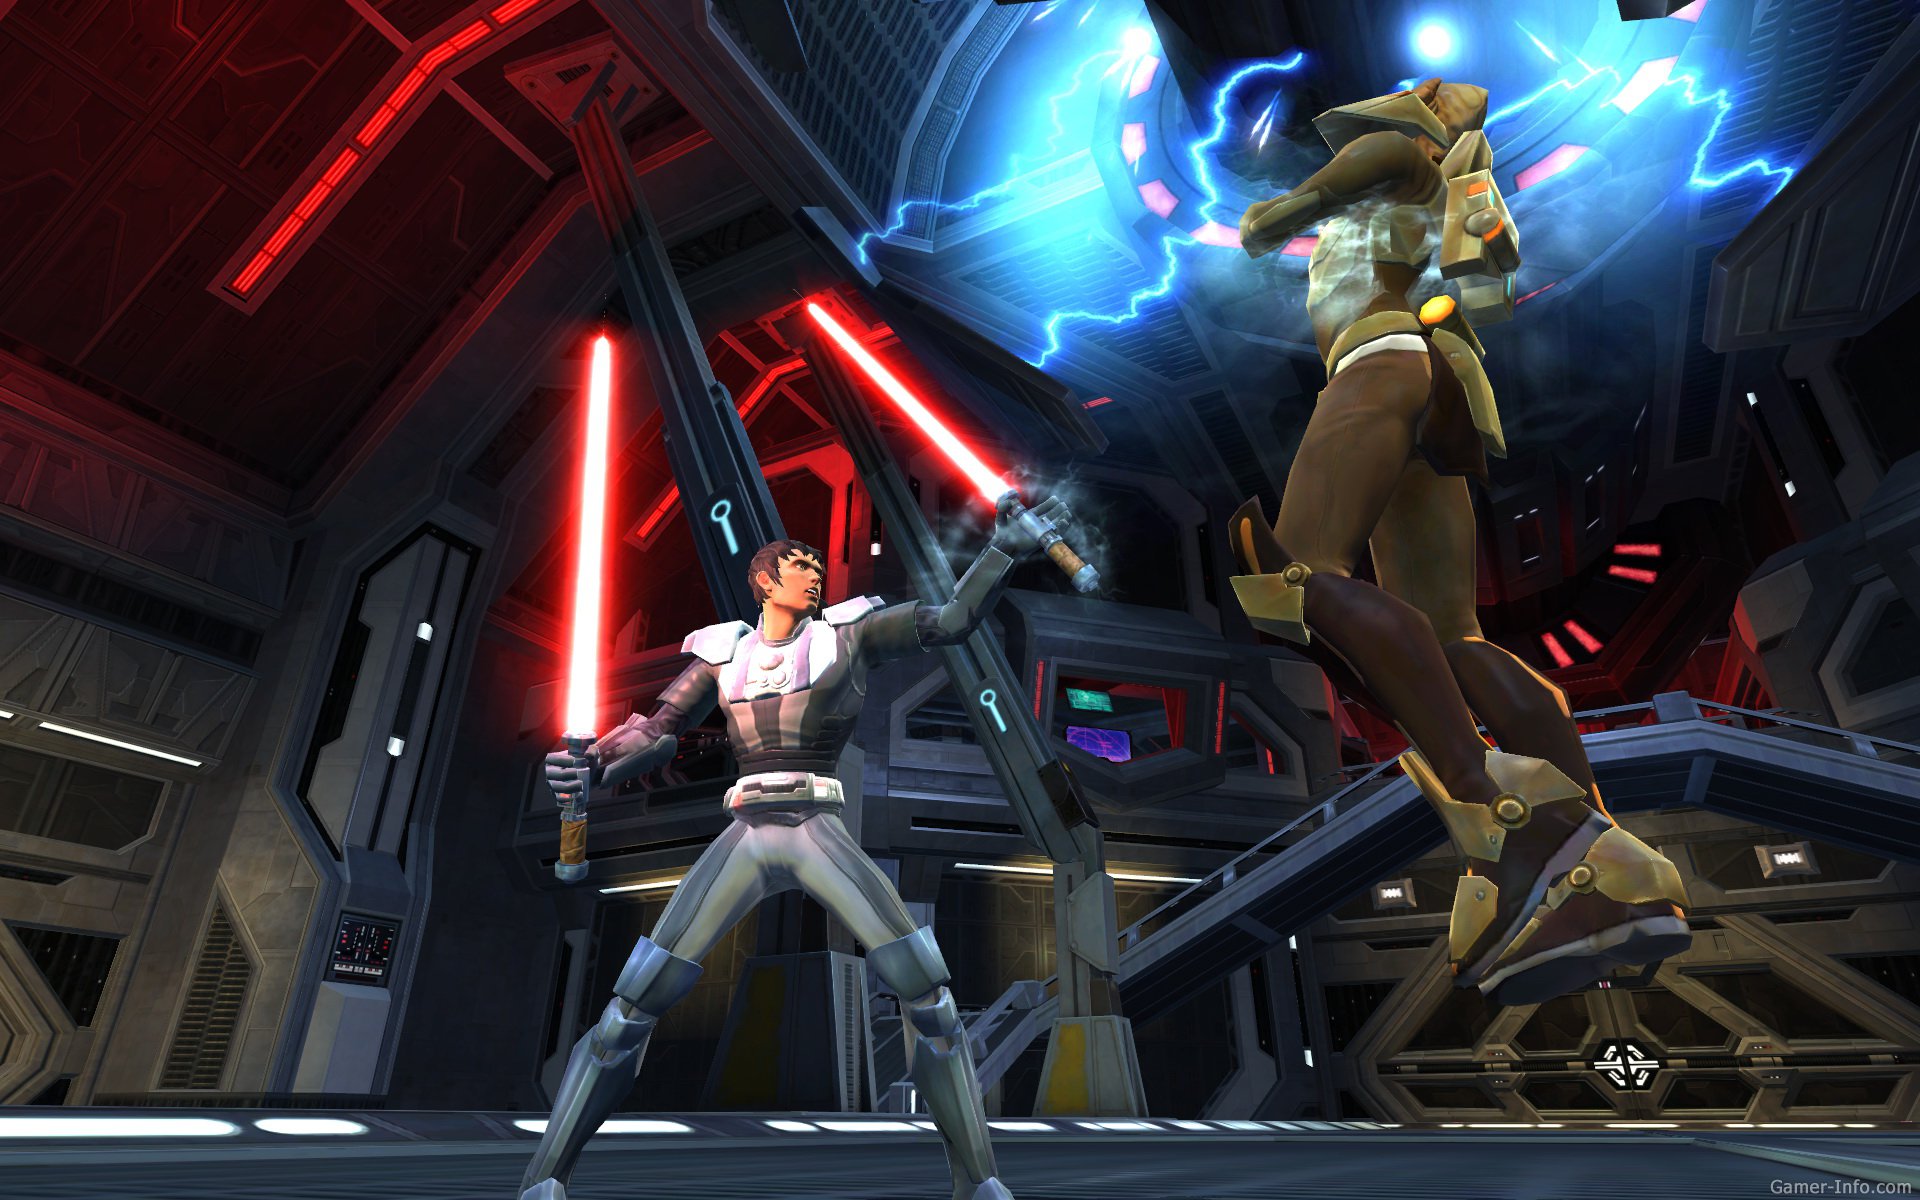 Star wars knight of the old republic 2 русификатор steam фото 111